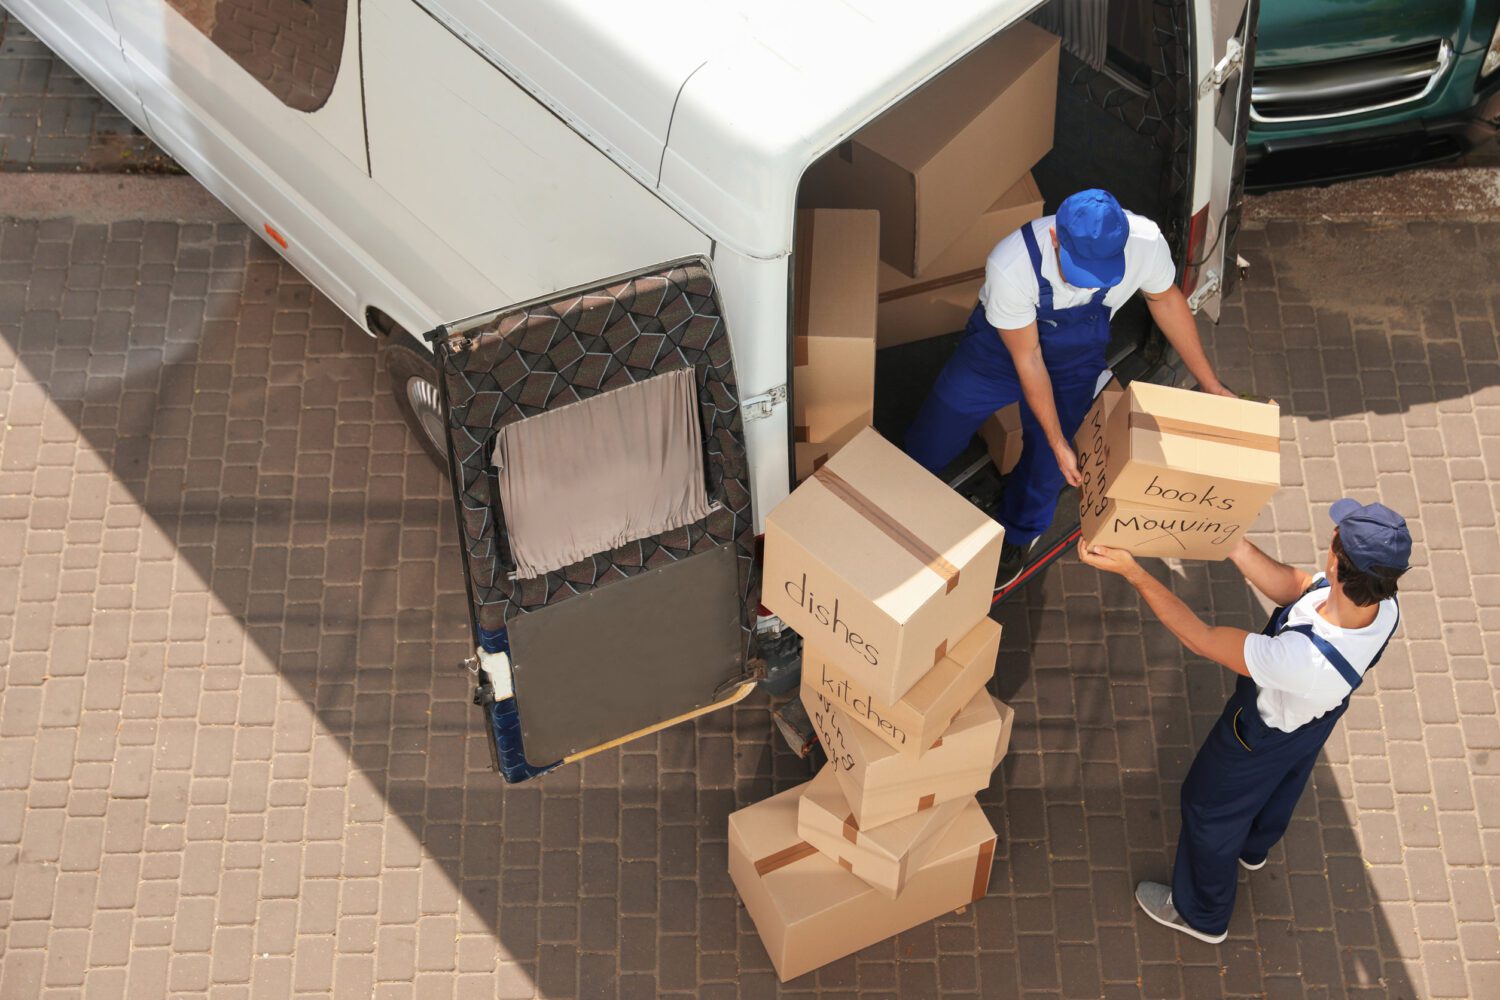 Movers Unloading Boxes From Van Outdoors